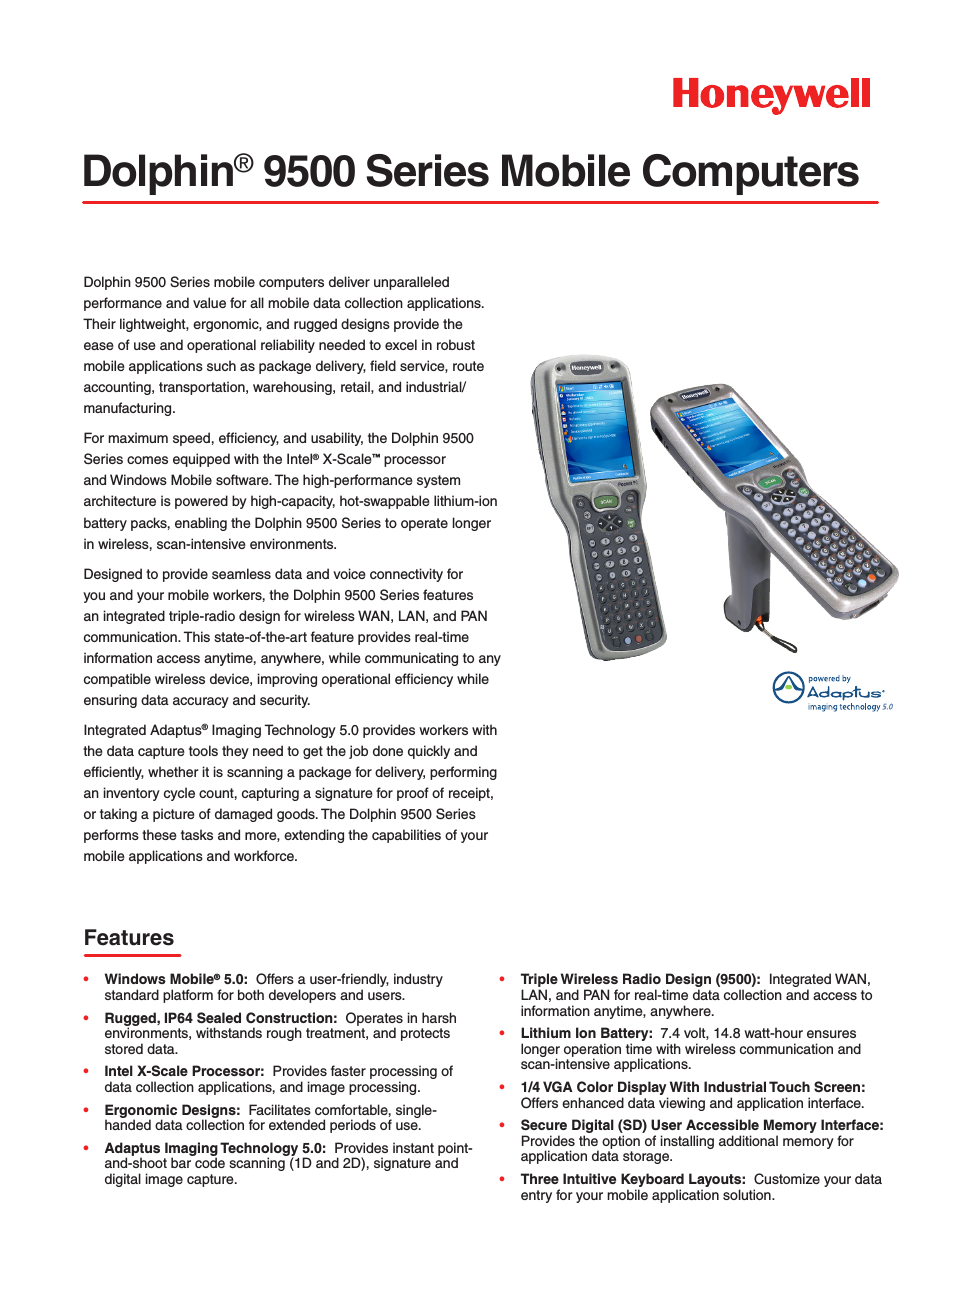 Dolphin 9500 Series (Page 1)